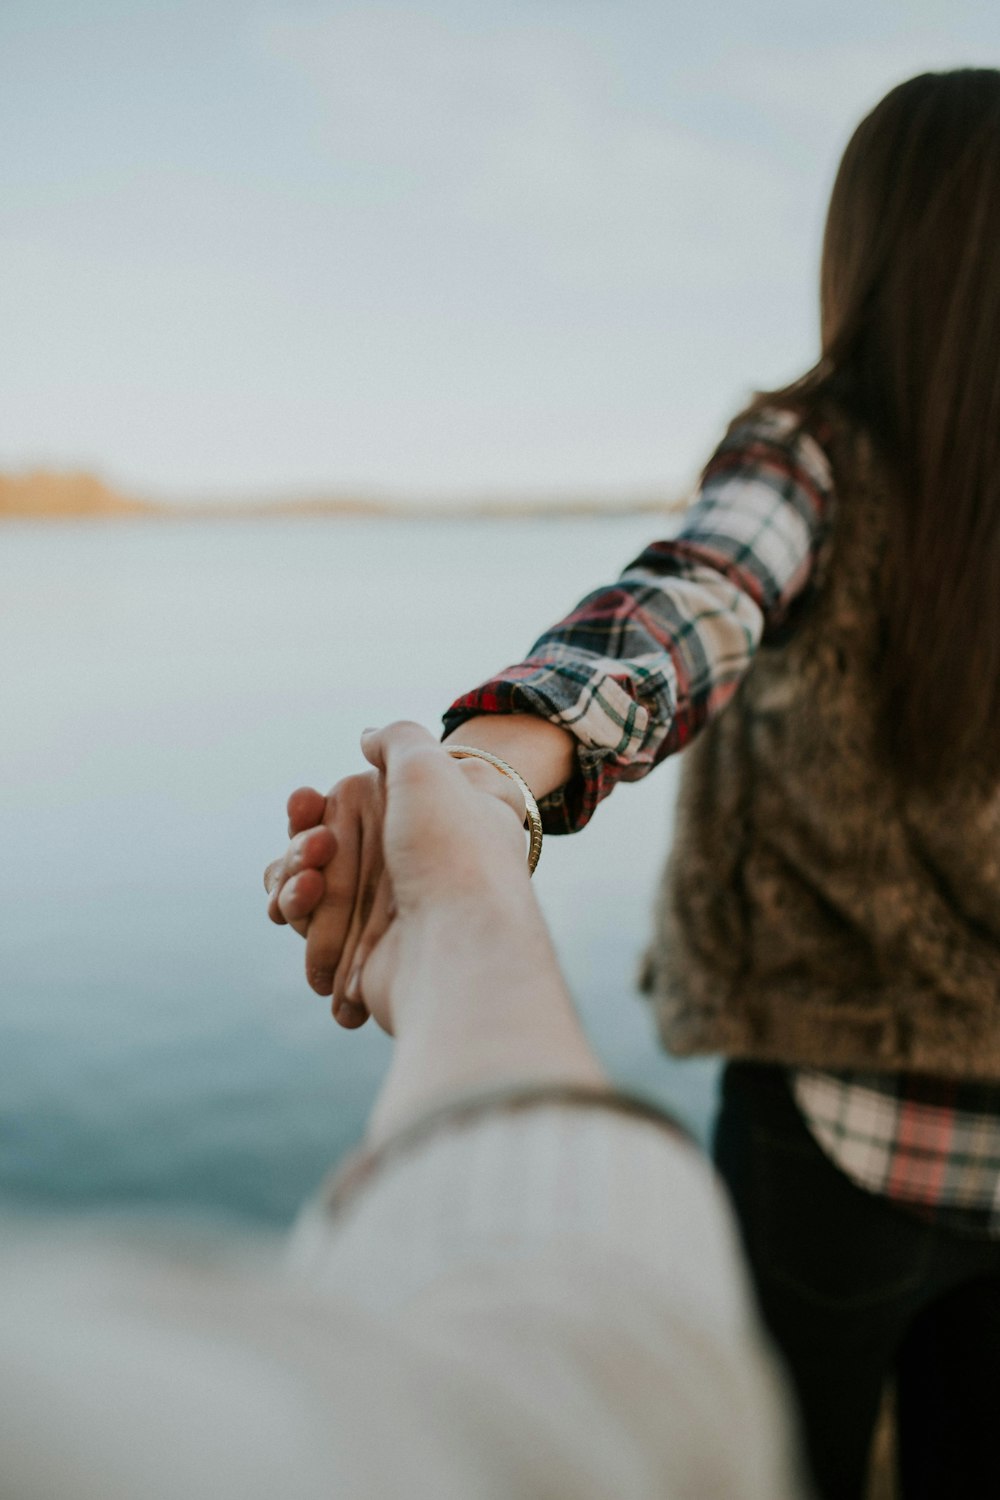 100 Couple Holding Hands Pictures Download Free Images On Unsplash Find & download the most popular couple hands photos on freepik free for commercial use high quality images over 8 million stock photos. 100 couple holding hands pictures